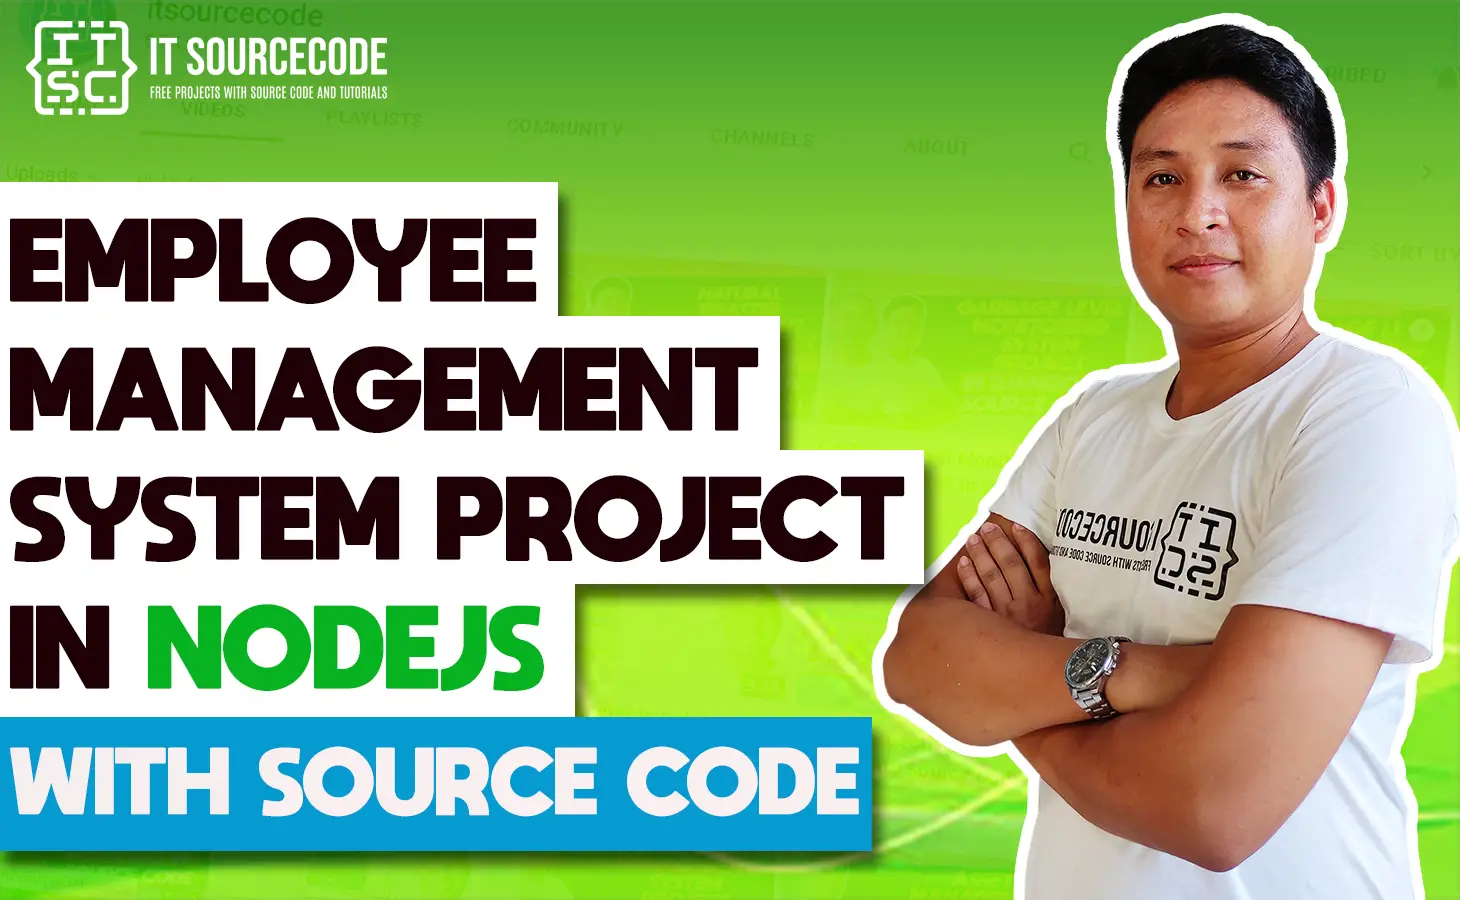 Employee Management System Project in NodeJS with Source Code